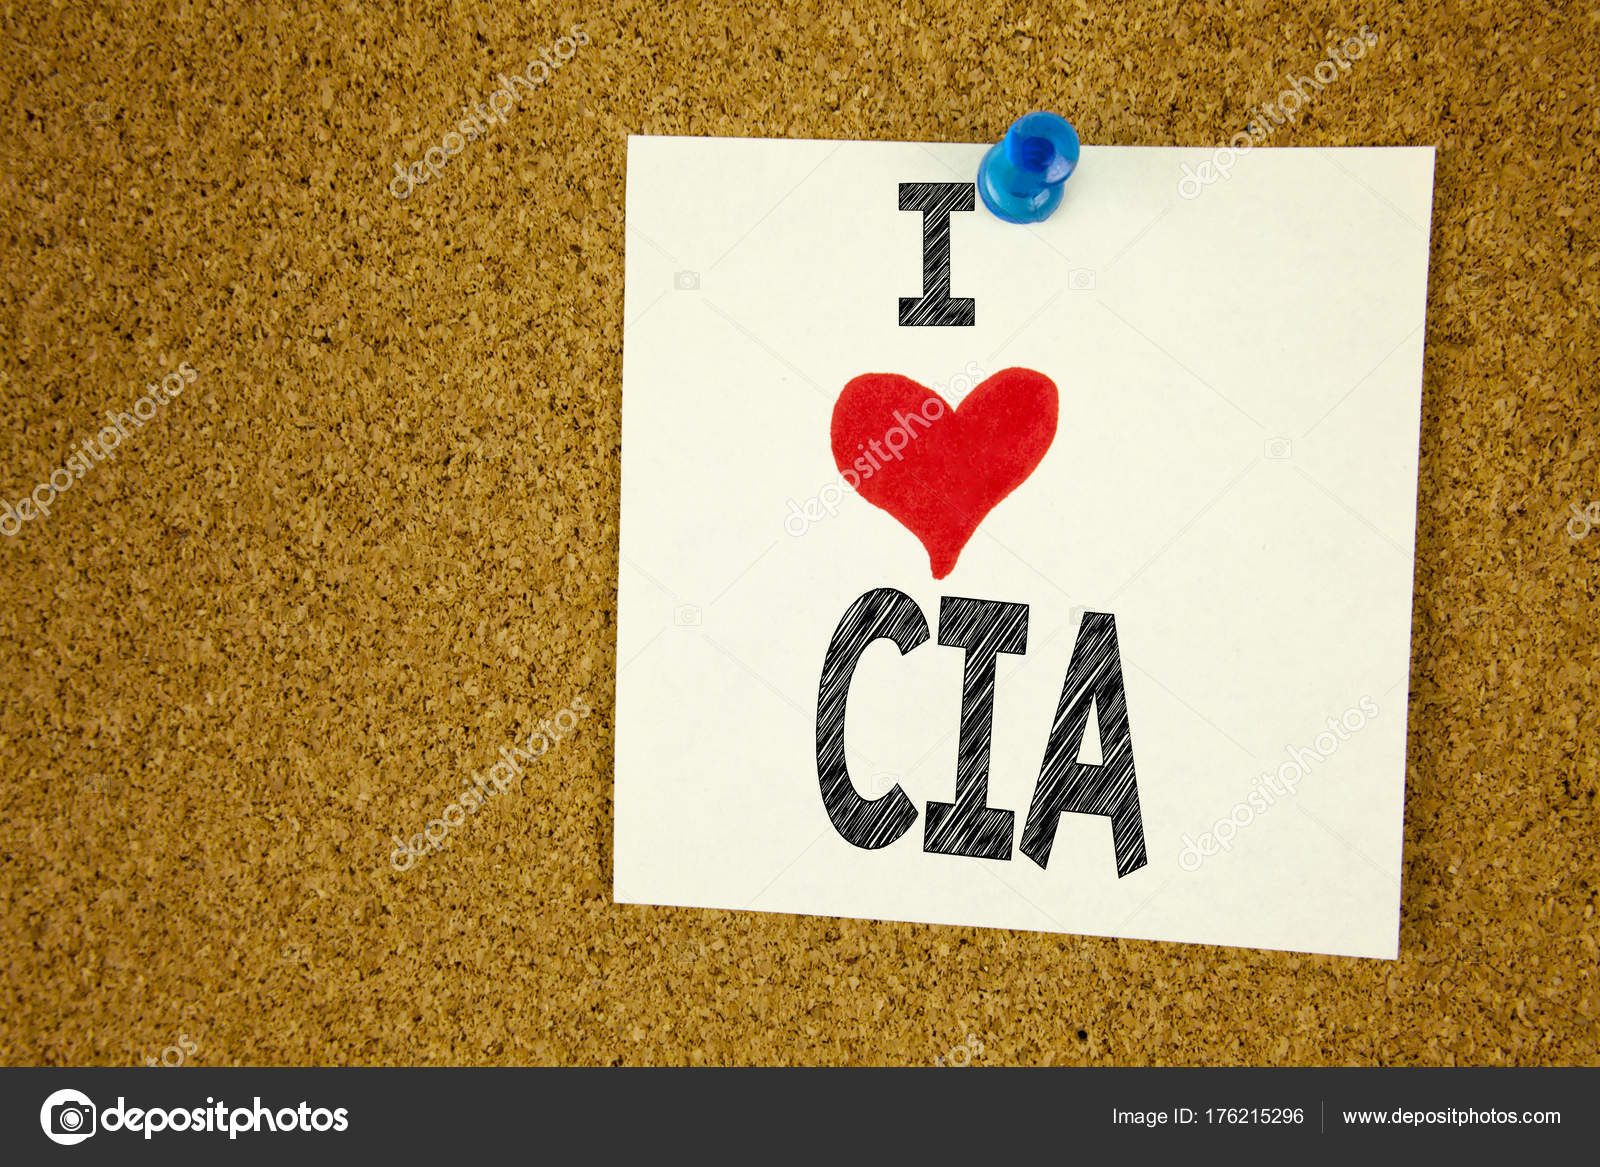 Hand Writing Text Caption Inspiration Showing I Love Cia Concept Meaning Abbreviation Loving Written On Sticky Note Reminder Isolated Background With Copy Space Stock Photo C Artursz